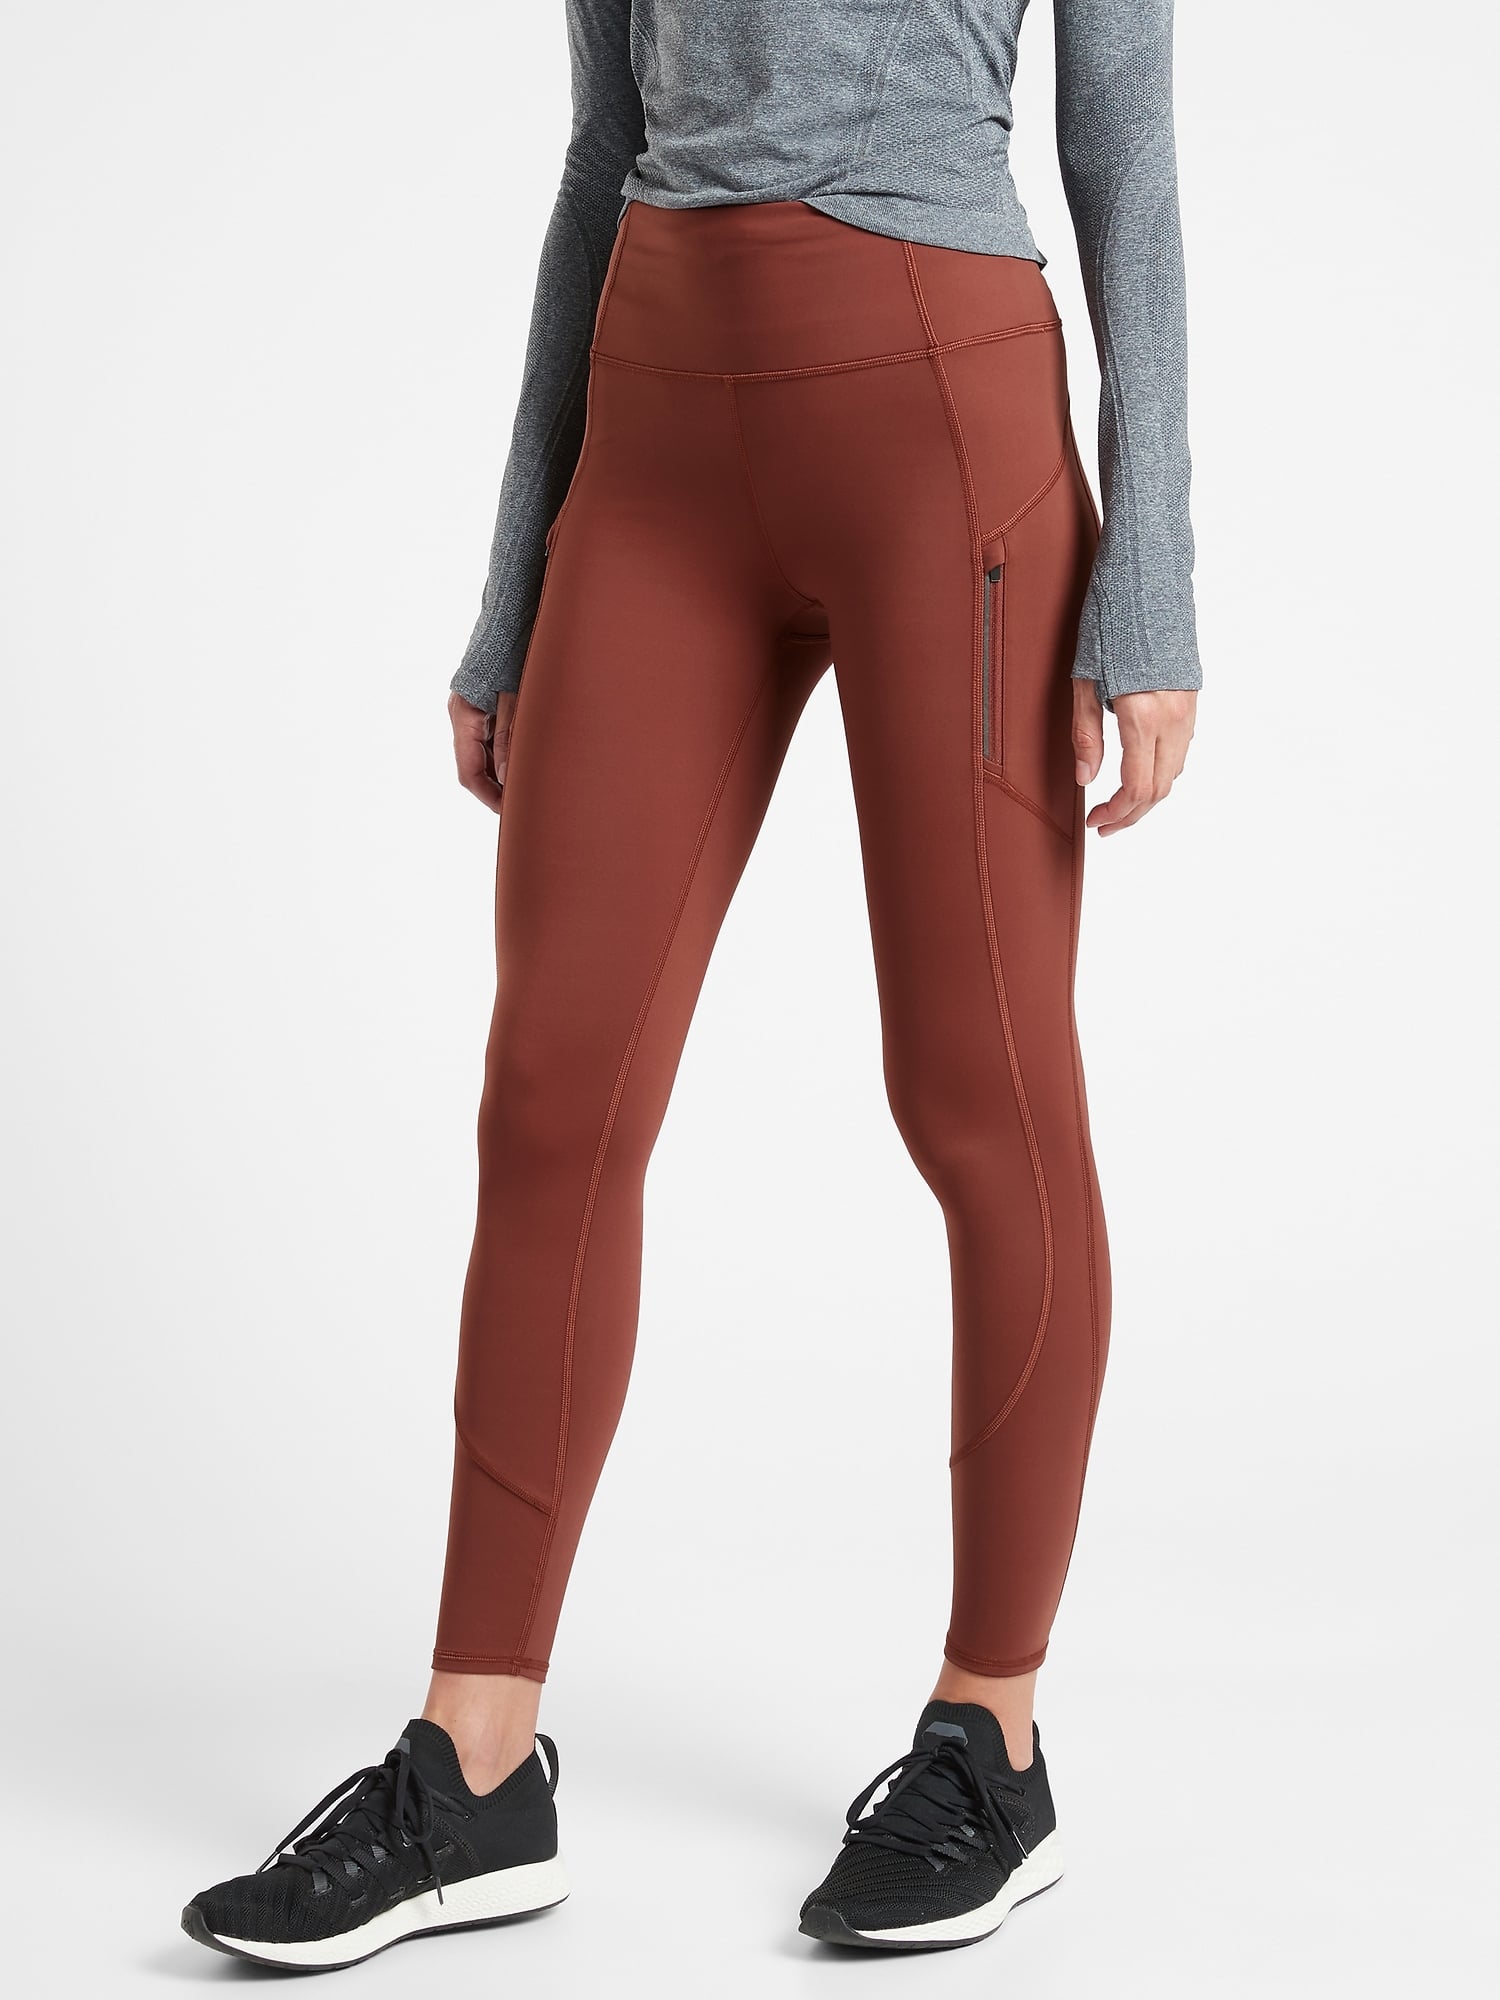 Athleta Rainier Tight, Gym Class Hero! This Brand Has the Best  Mother-Daughter Fitness Sets